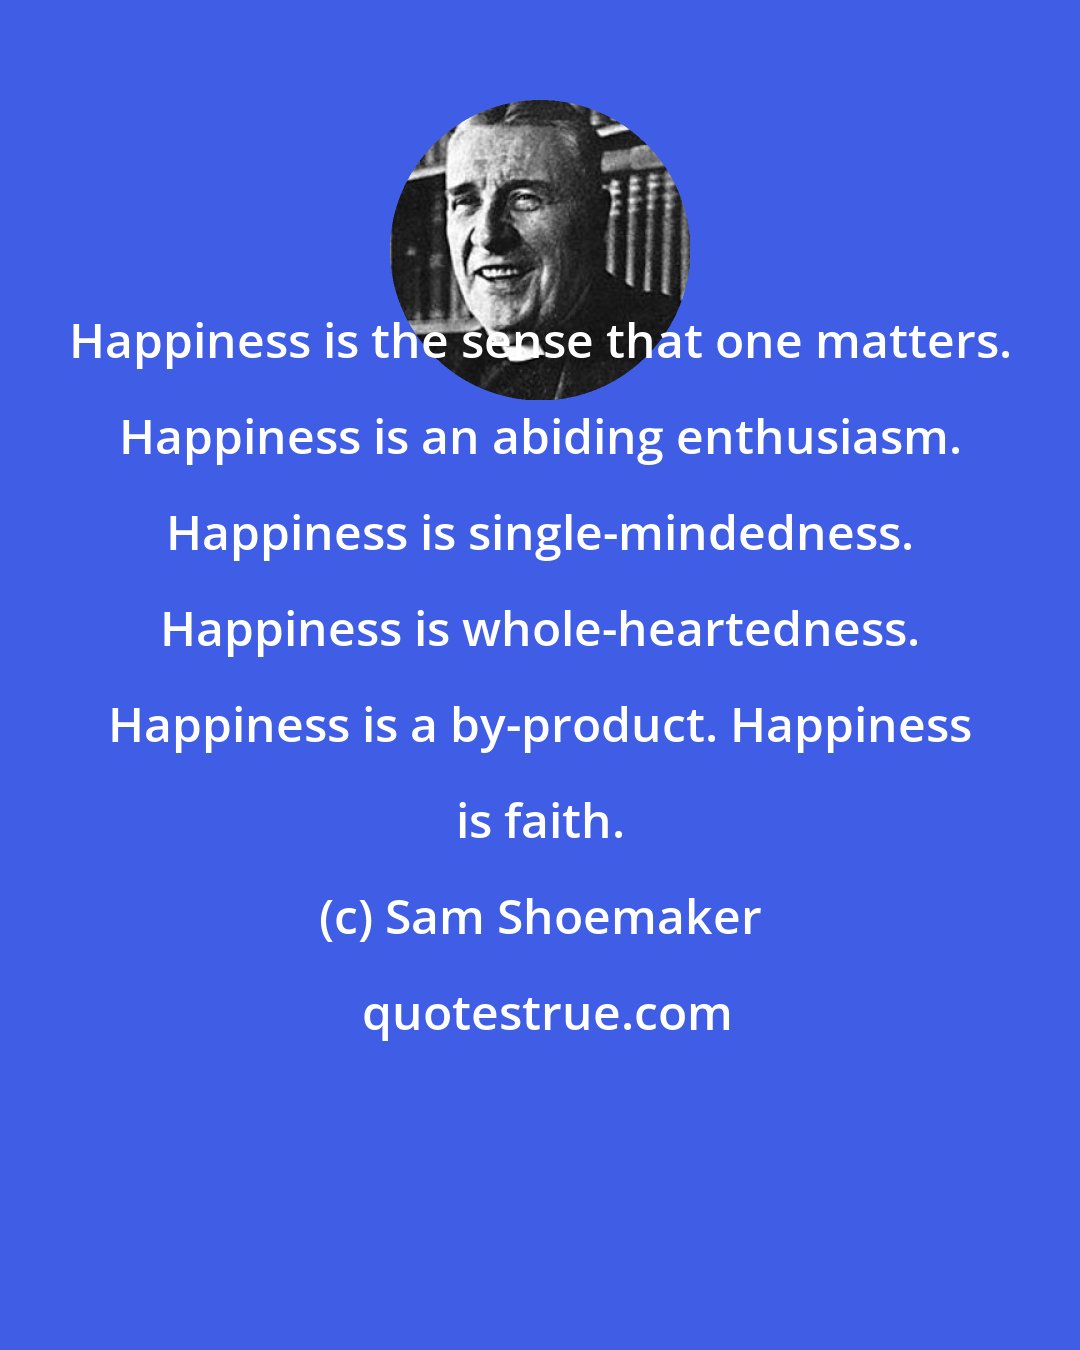 Sam Shoemaker: Happiness is the sense that one matters. Happiness is an abiding enthusiasm. Happiness is single-mindedness. Happiness is whole-heartedness. Happiness is a by-product. Happiness is faith.